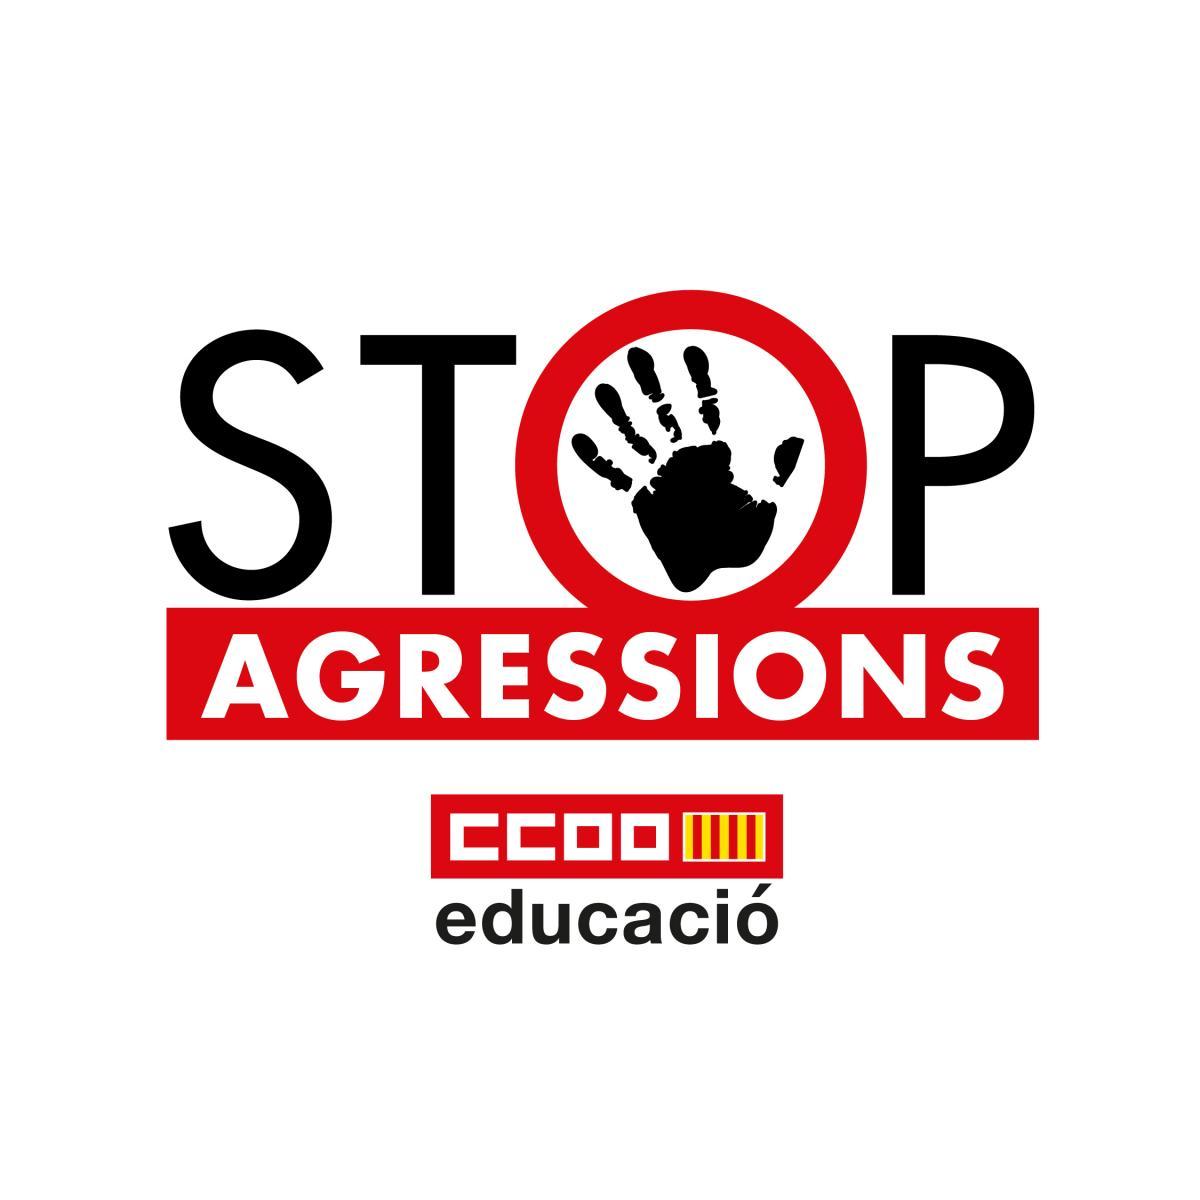 STOP agressions